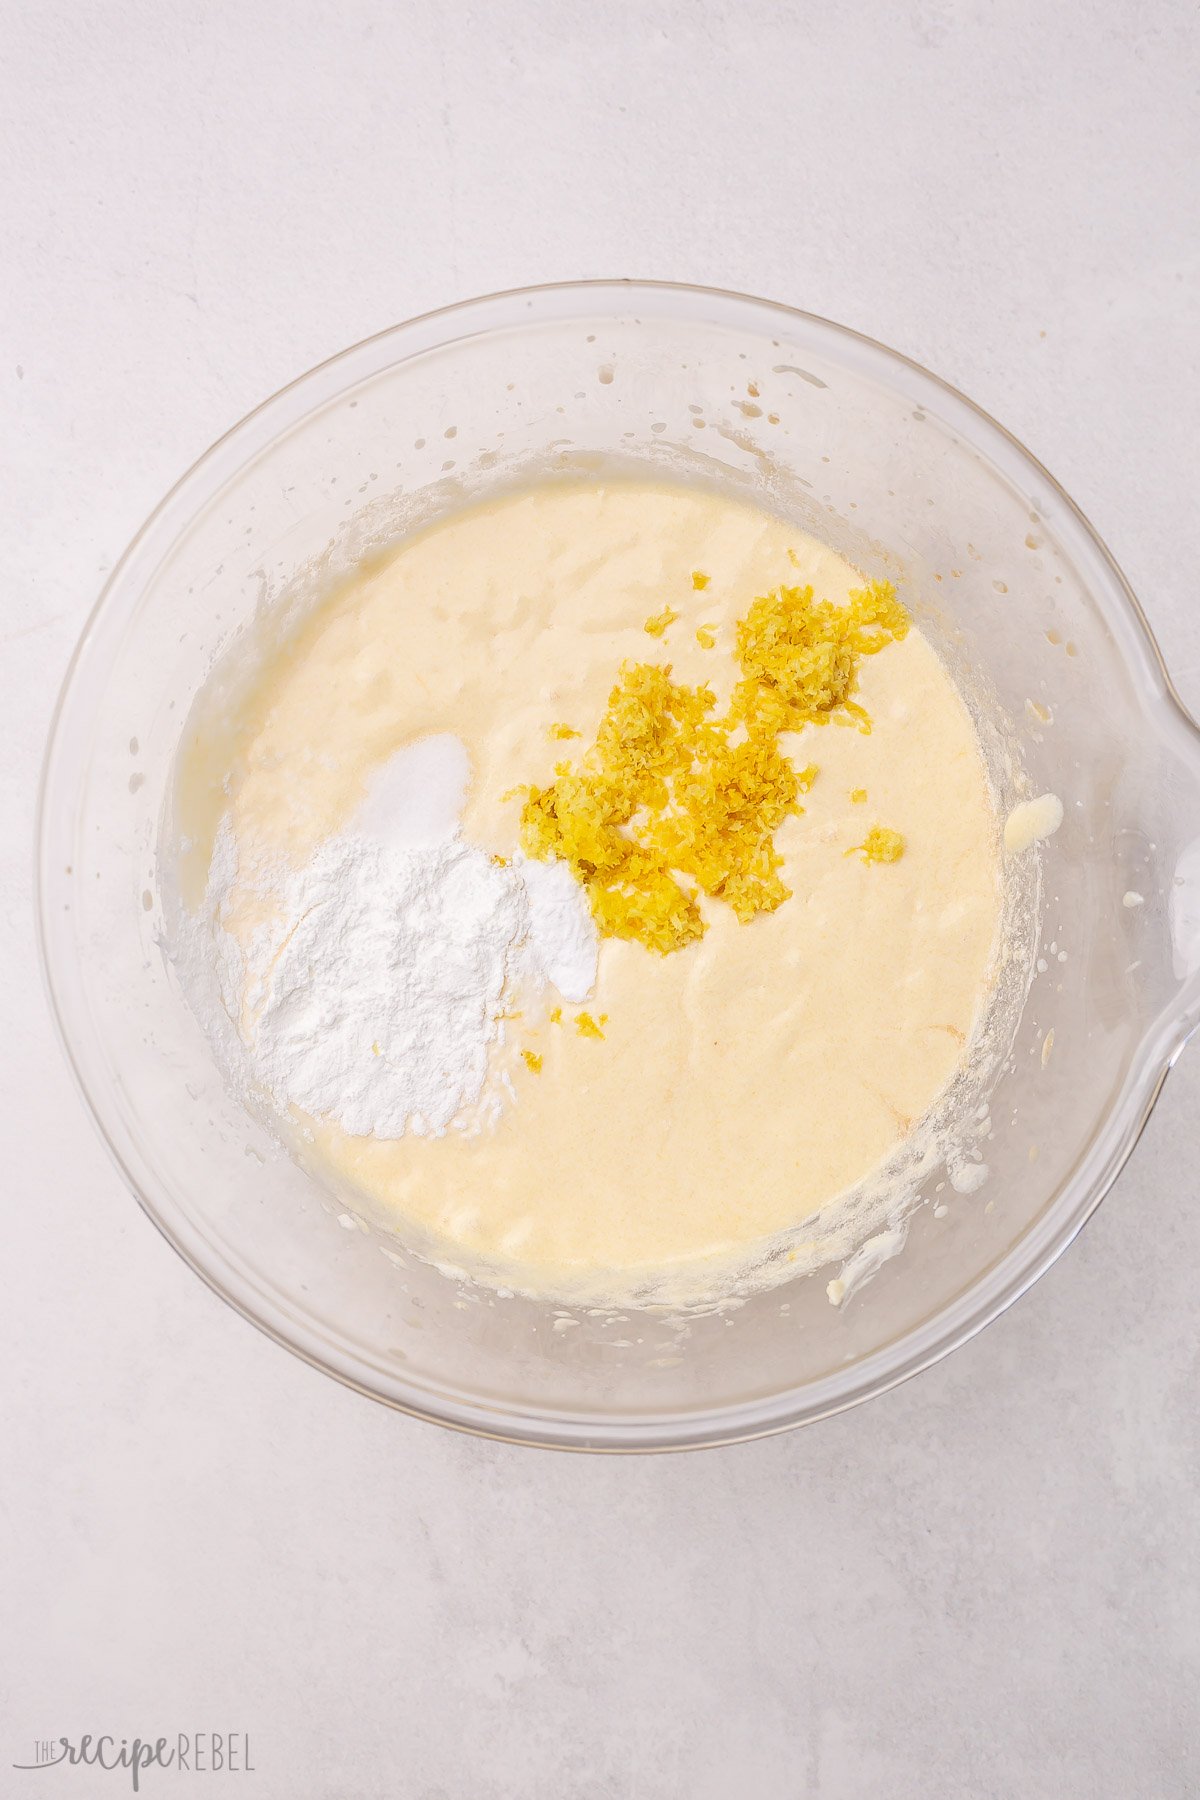 leaveners and lemon zest added to bowl with cake batter.